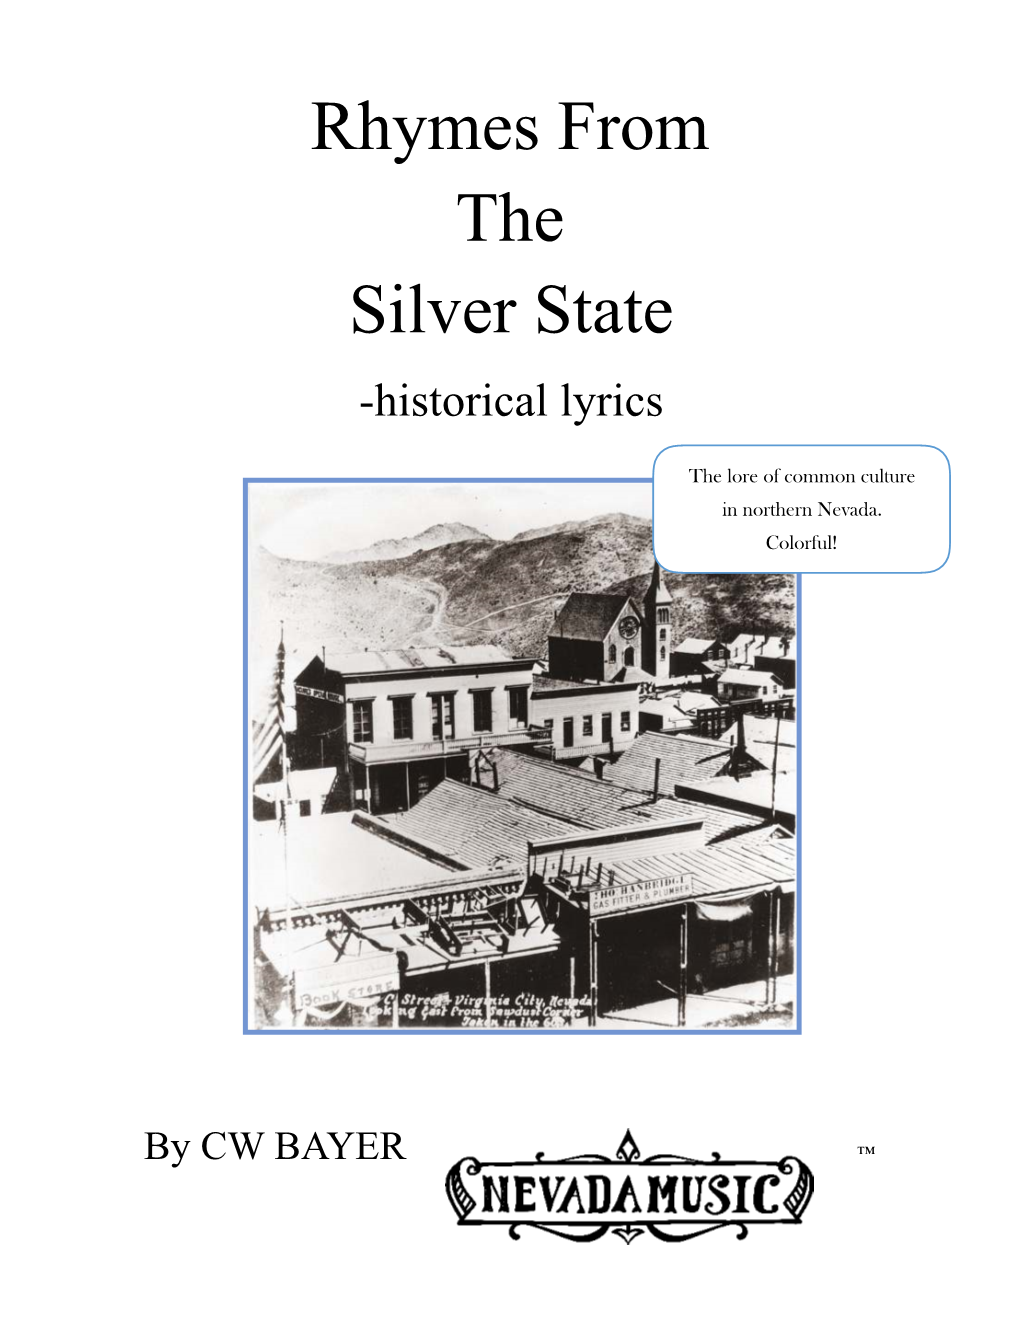 Rhymes from the Silver State March 2019